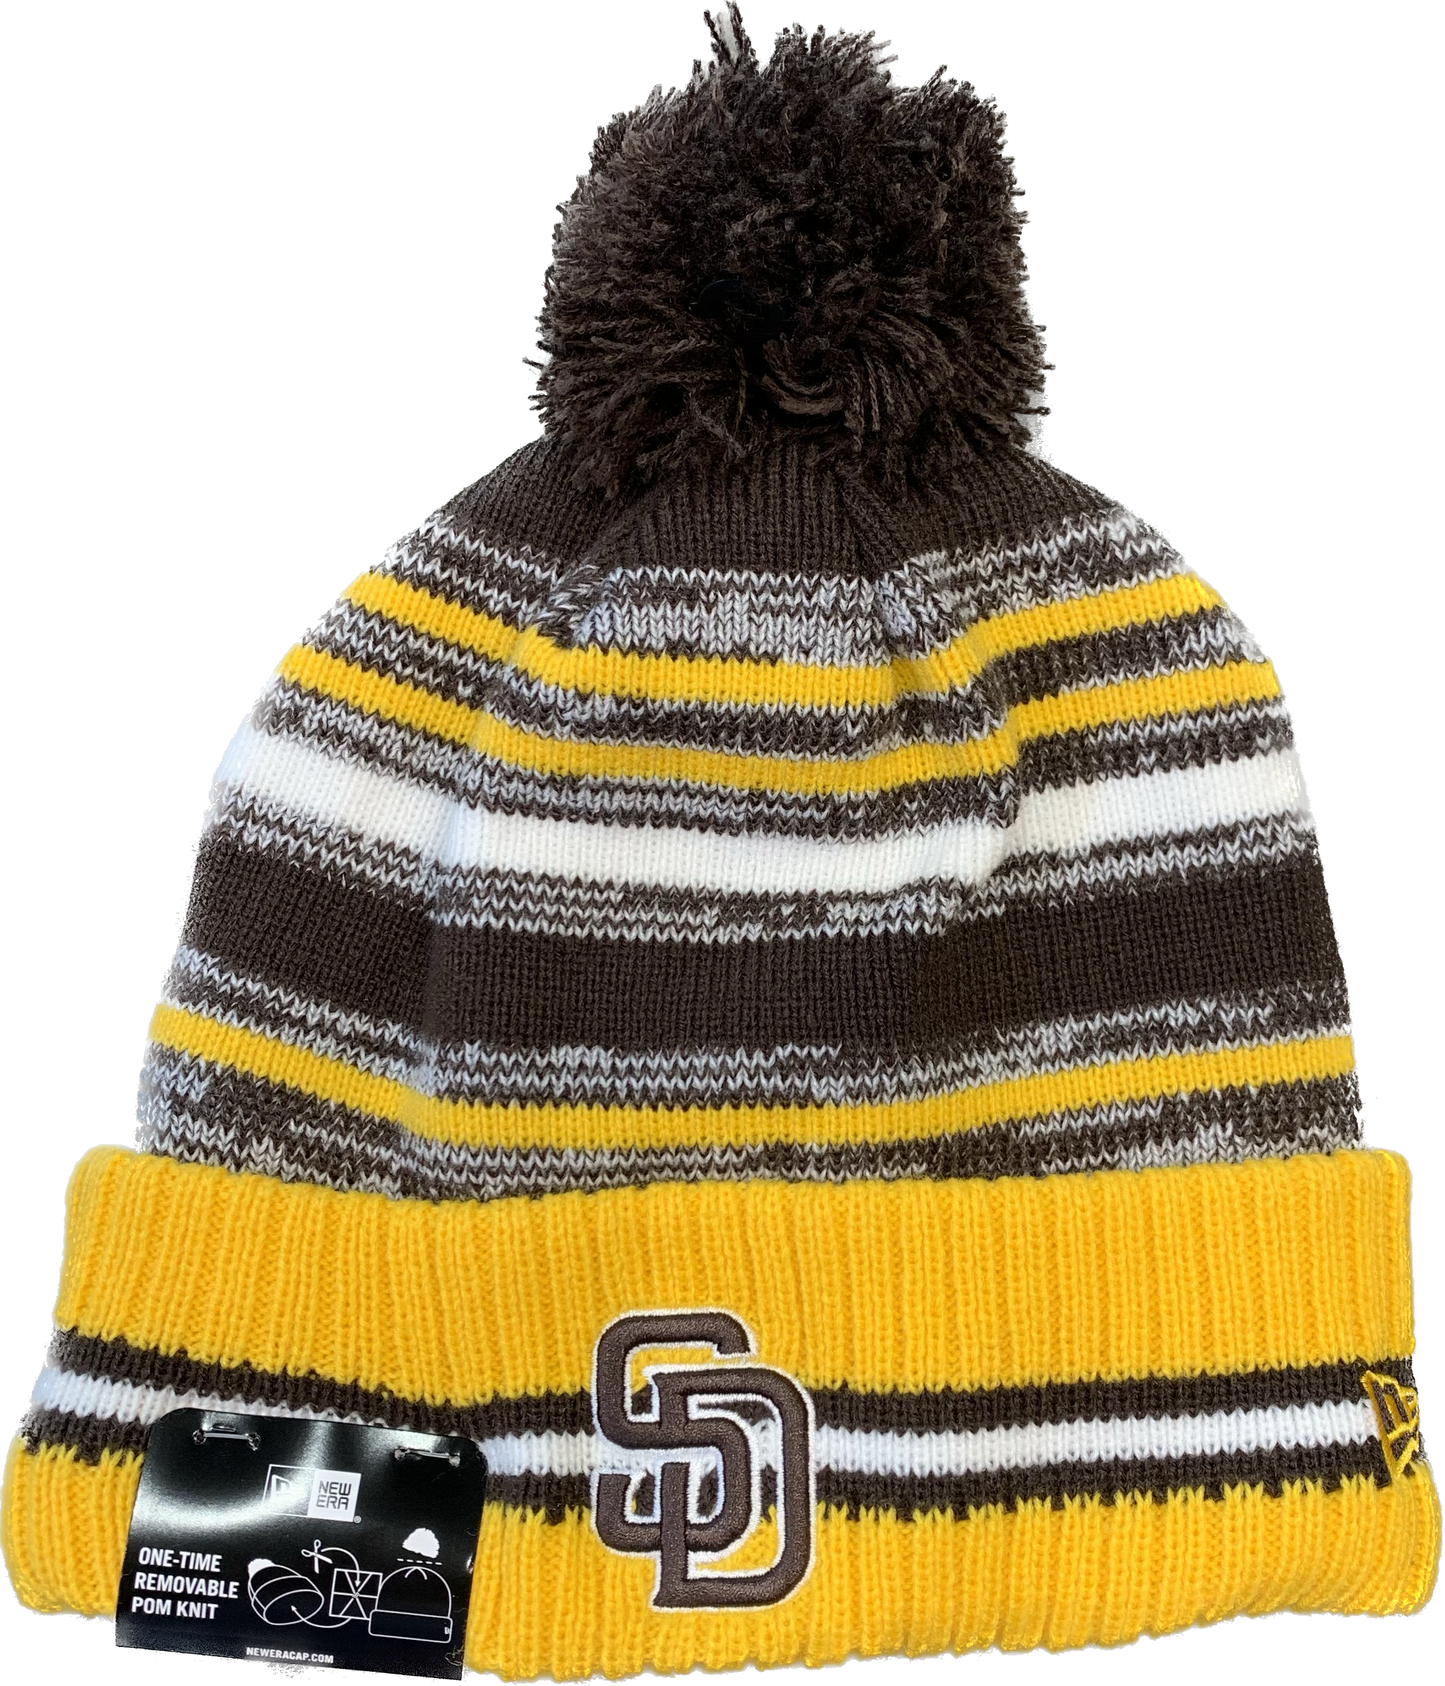 TUQUE KNITSPORT D3 MLB PADRES